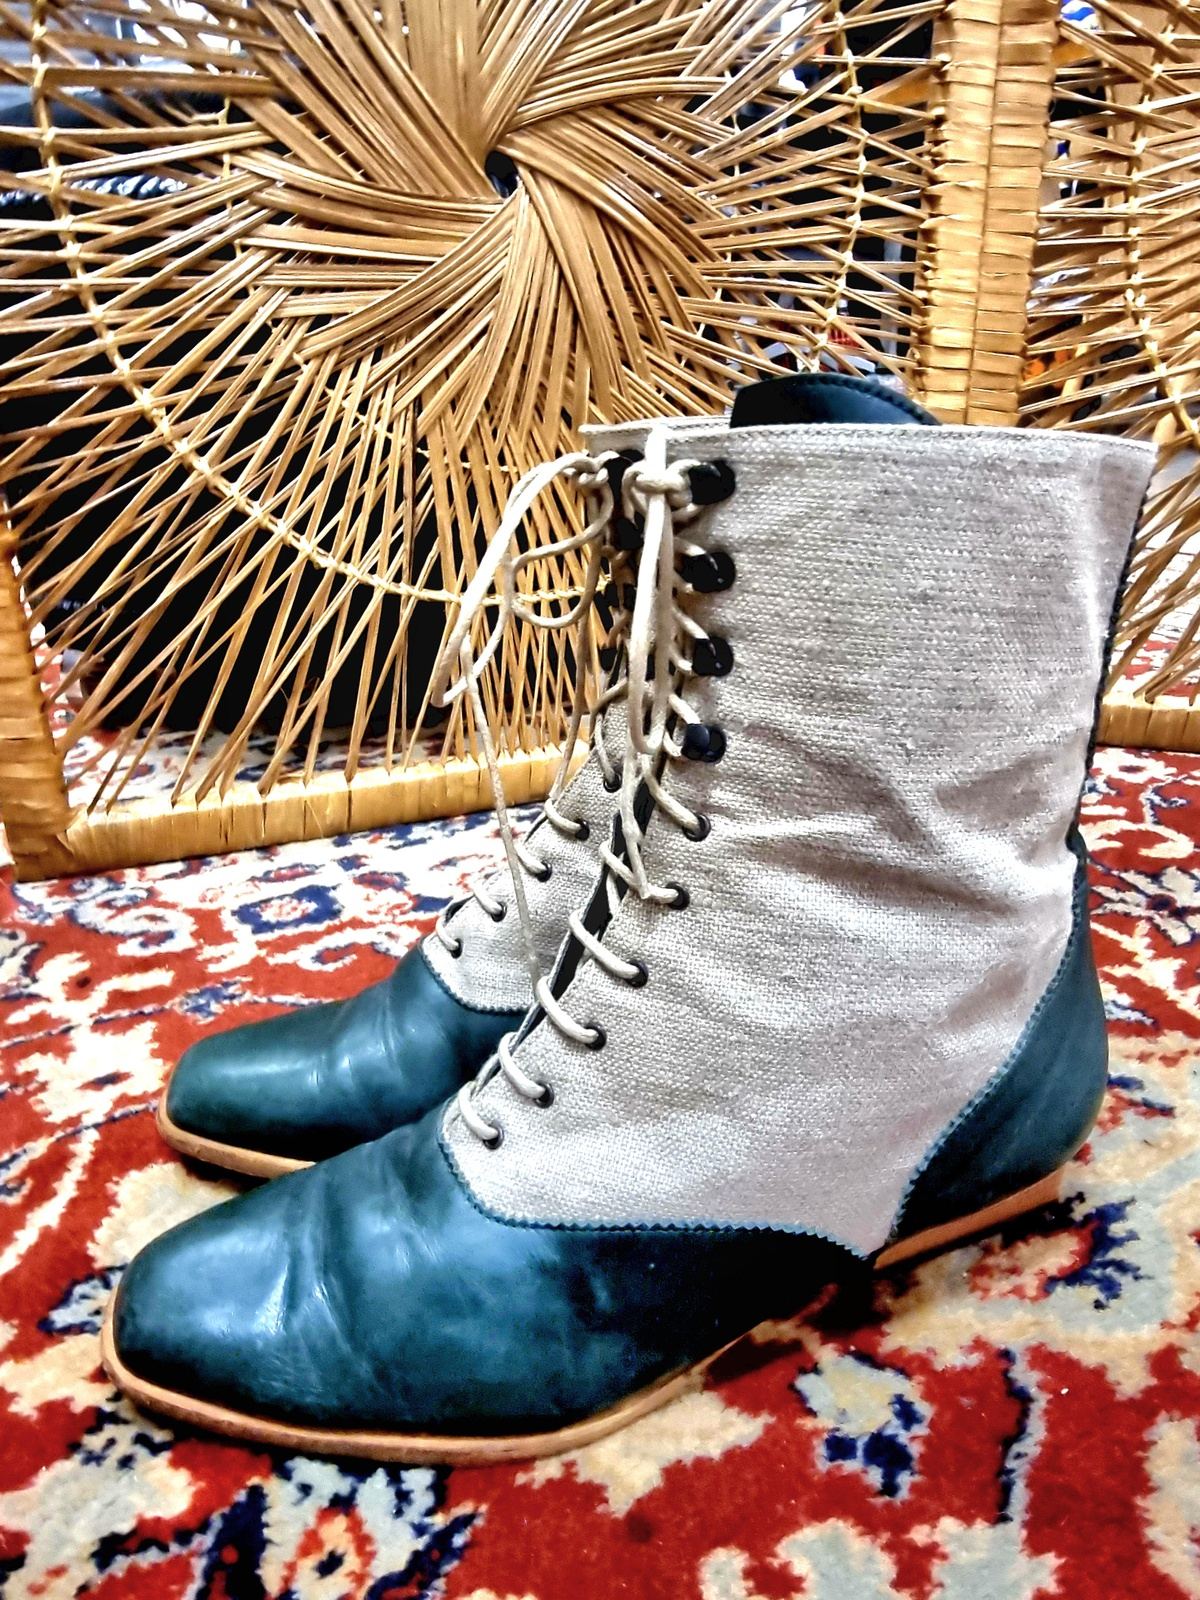 Vintage Siidtiroler Schube Ankle Boots